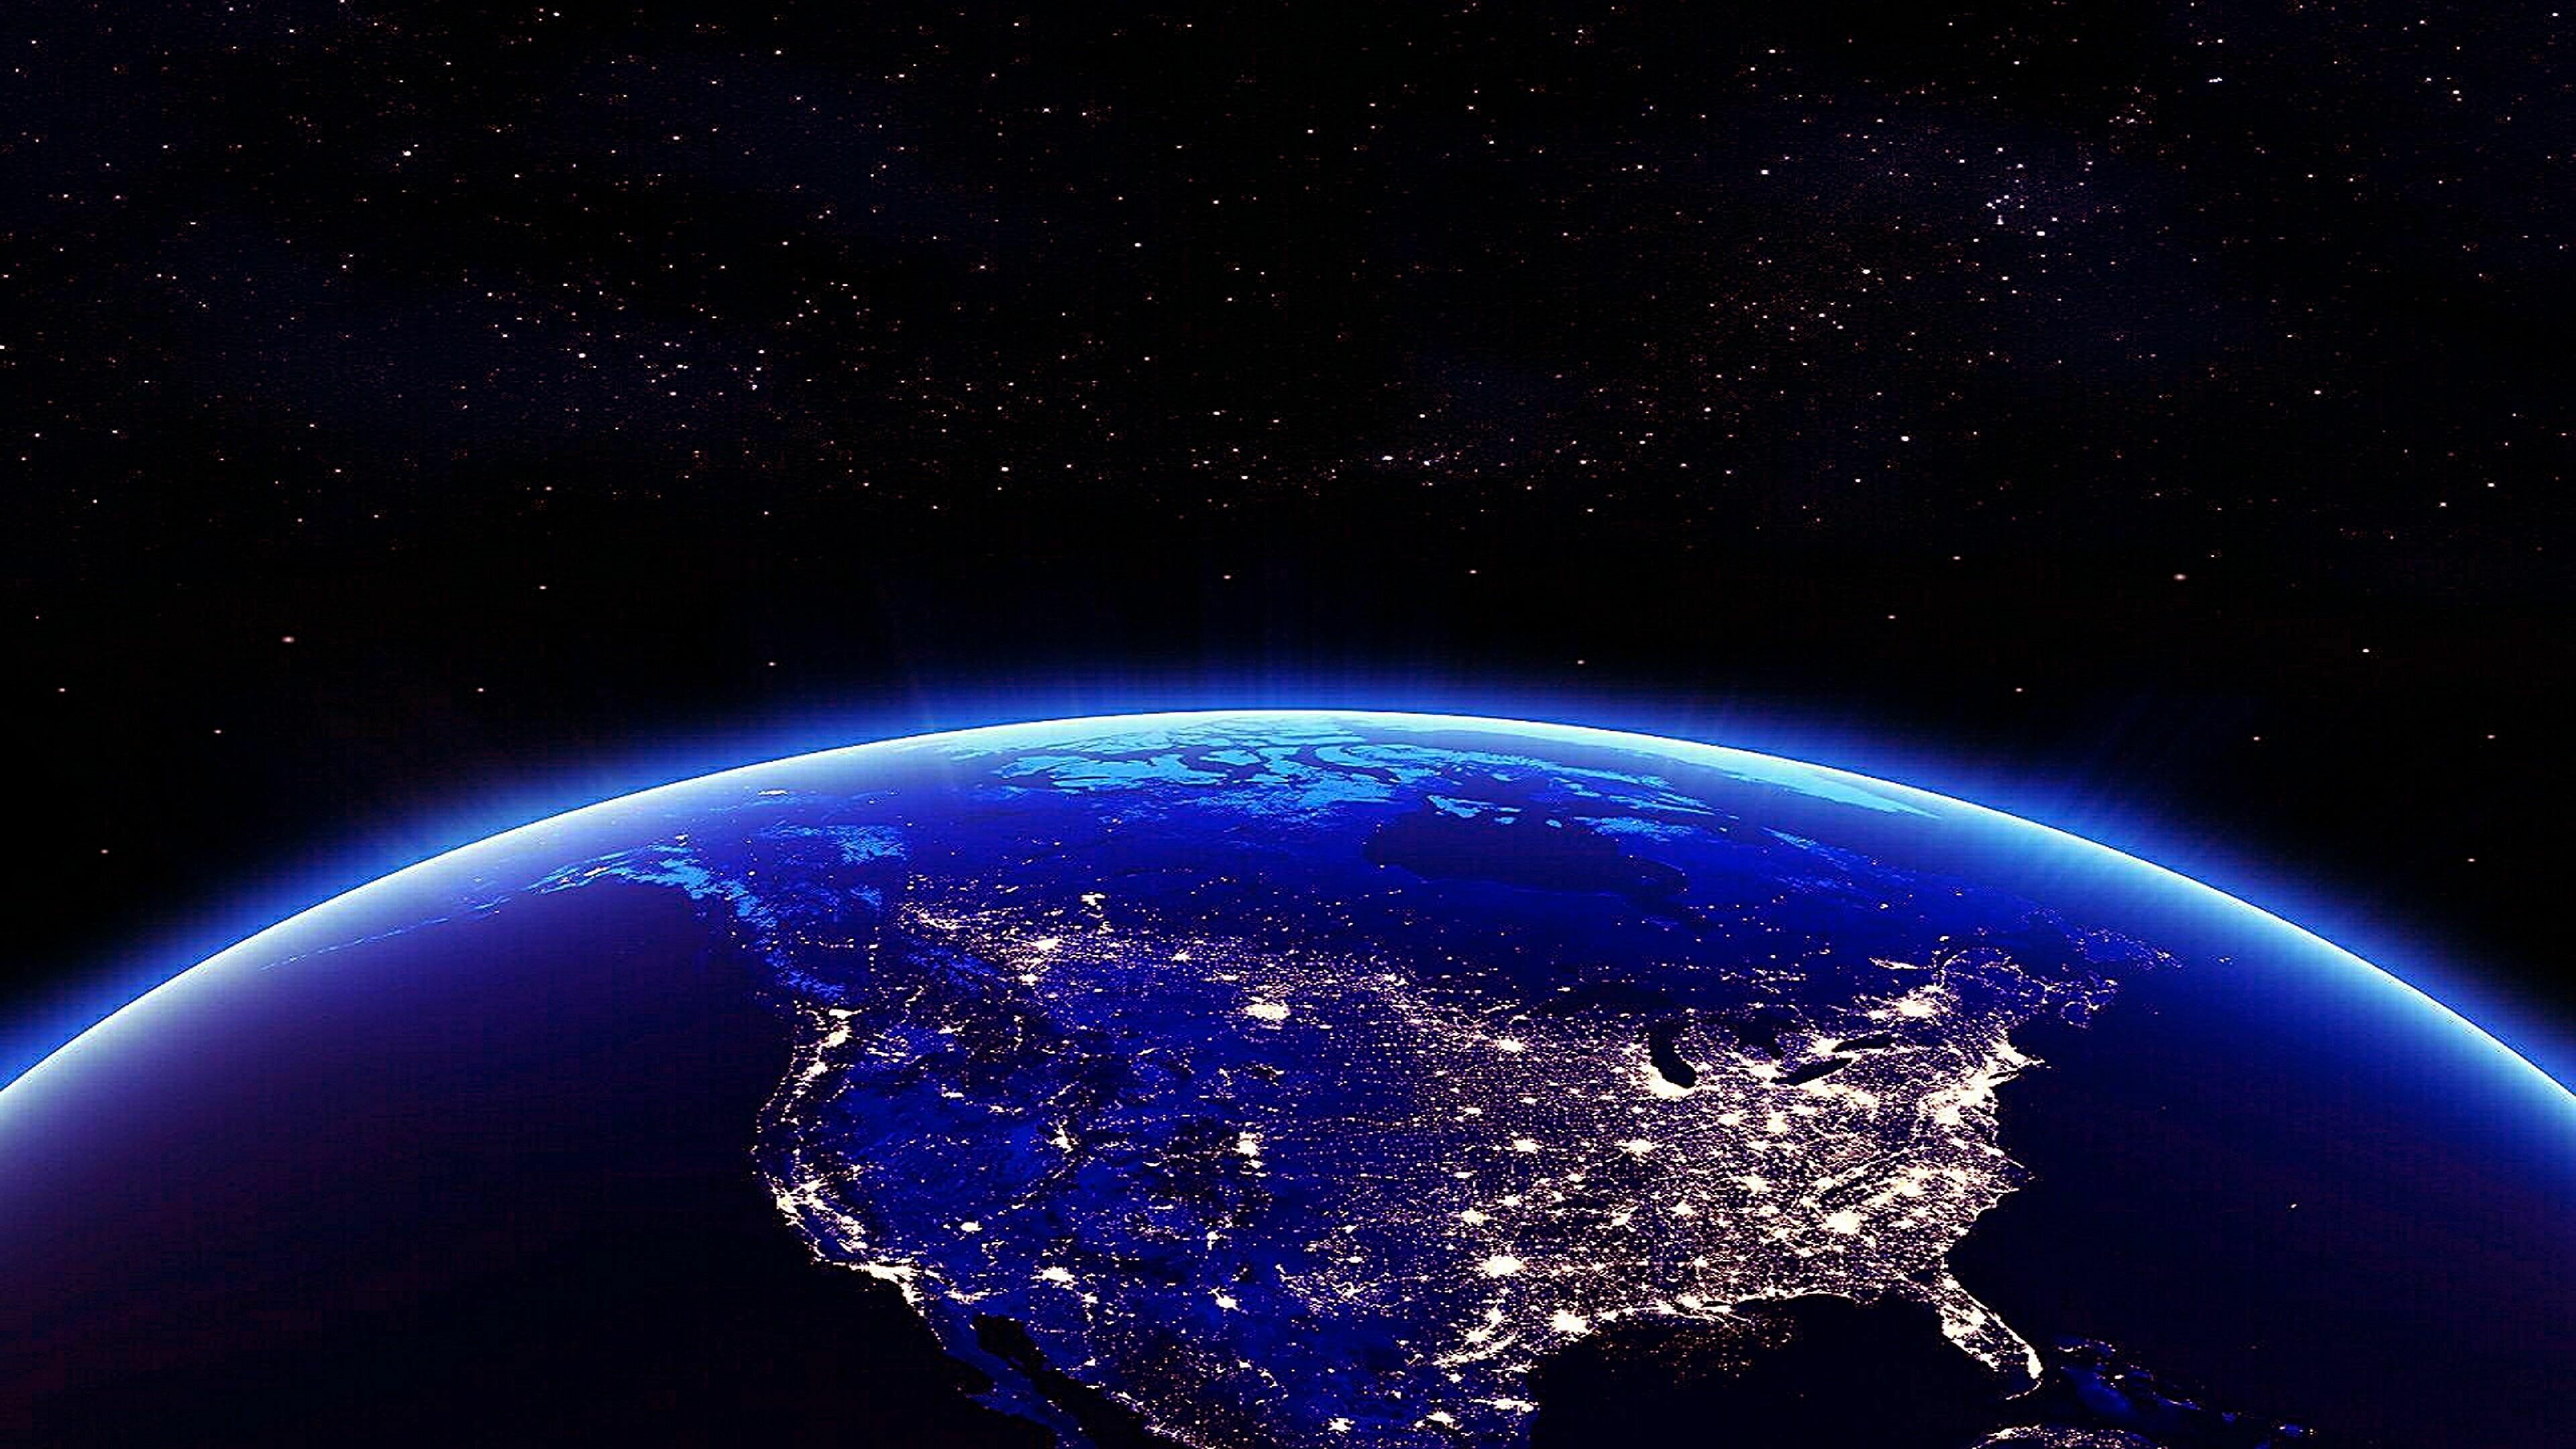 Earth at Night: By the darkness, stars are revealed, The view of the USA from space. 3840x2160 4K Background.